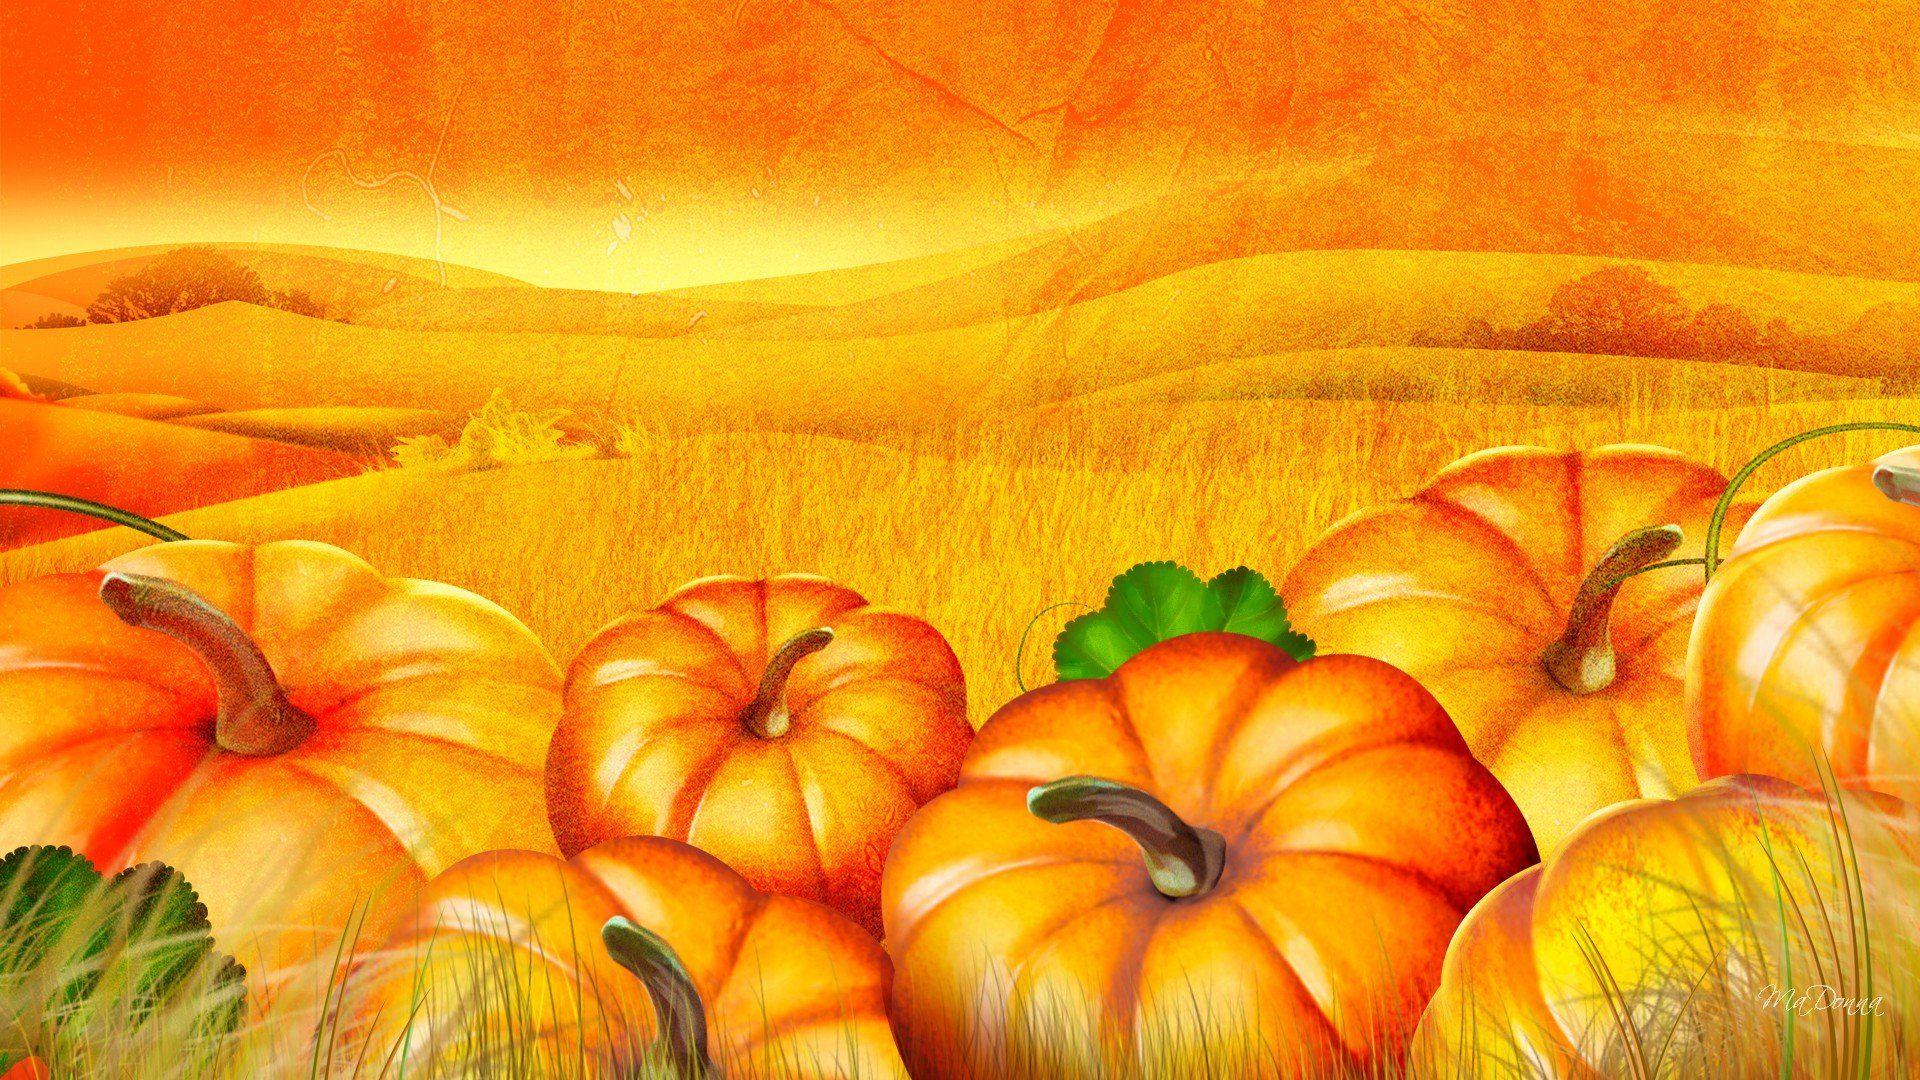 Fall Wallpaper Background With Pumpkins. New Fall Pics. NMgnCP